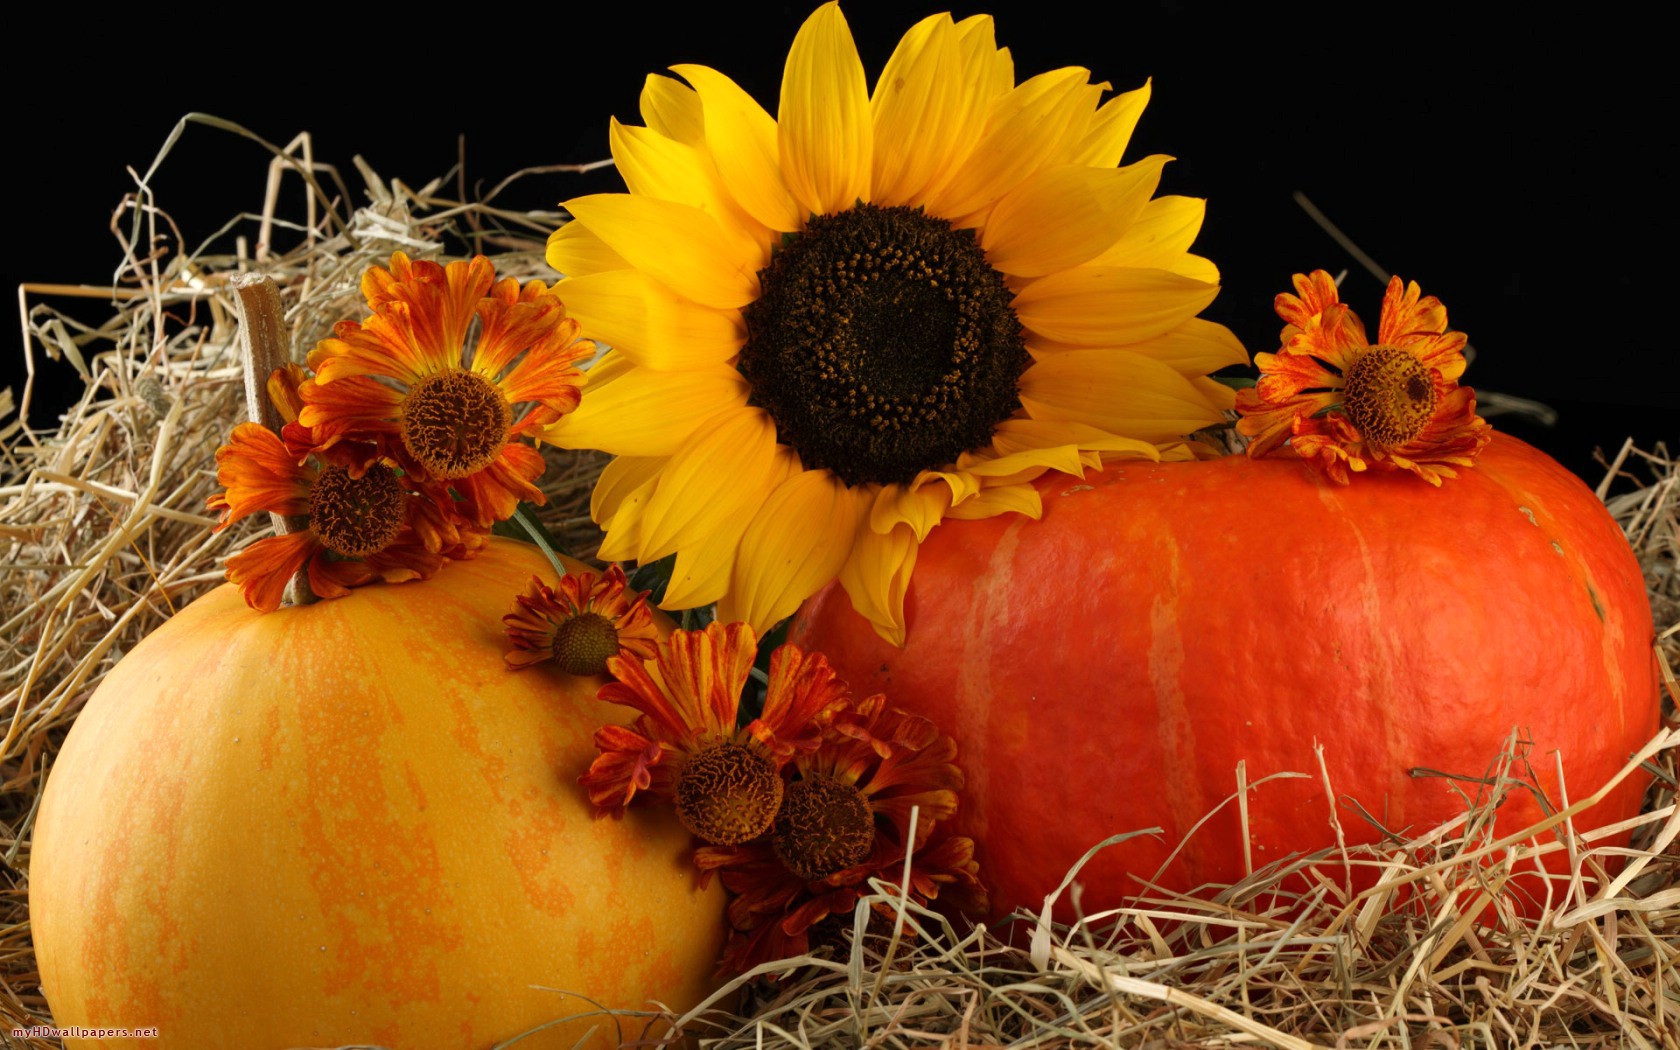 Autumn Scenery Wallpaper With Pumpkins Sunflowers And Are